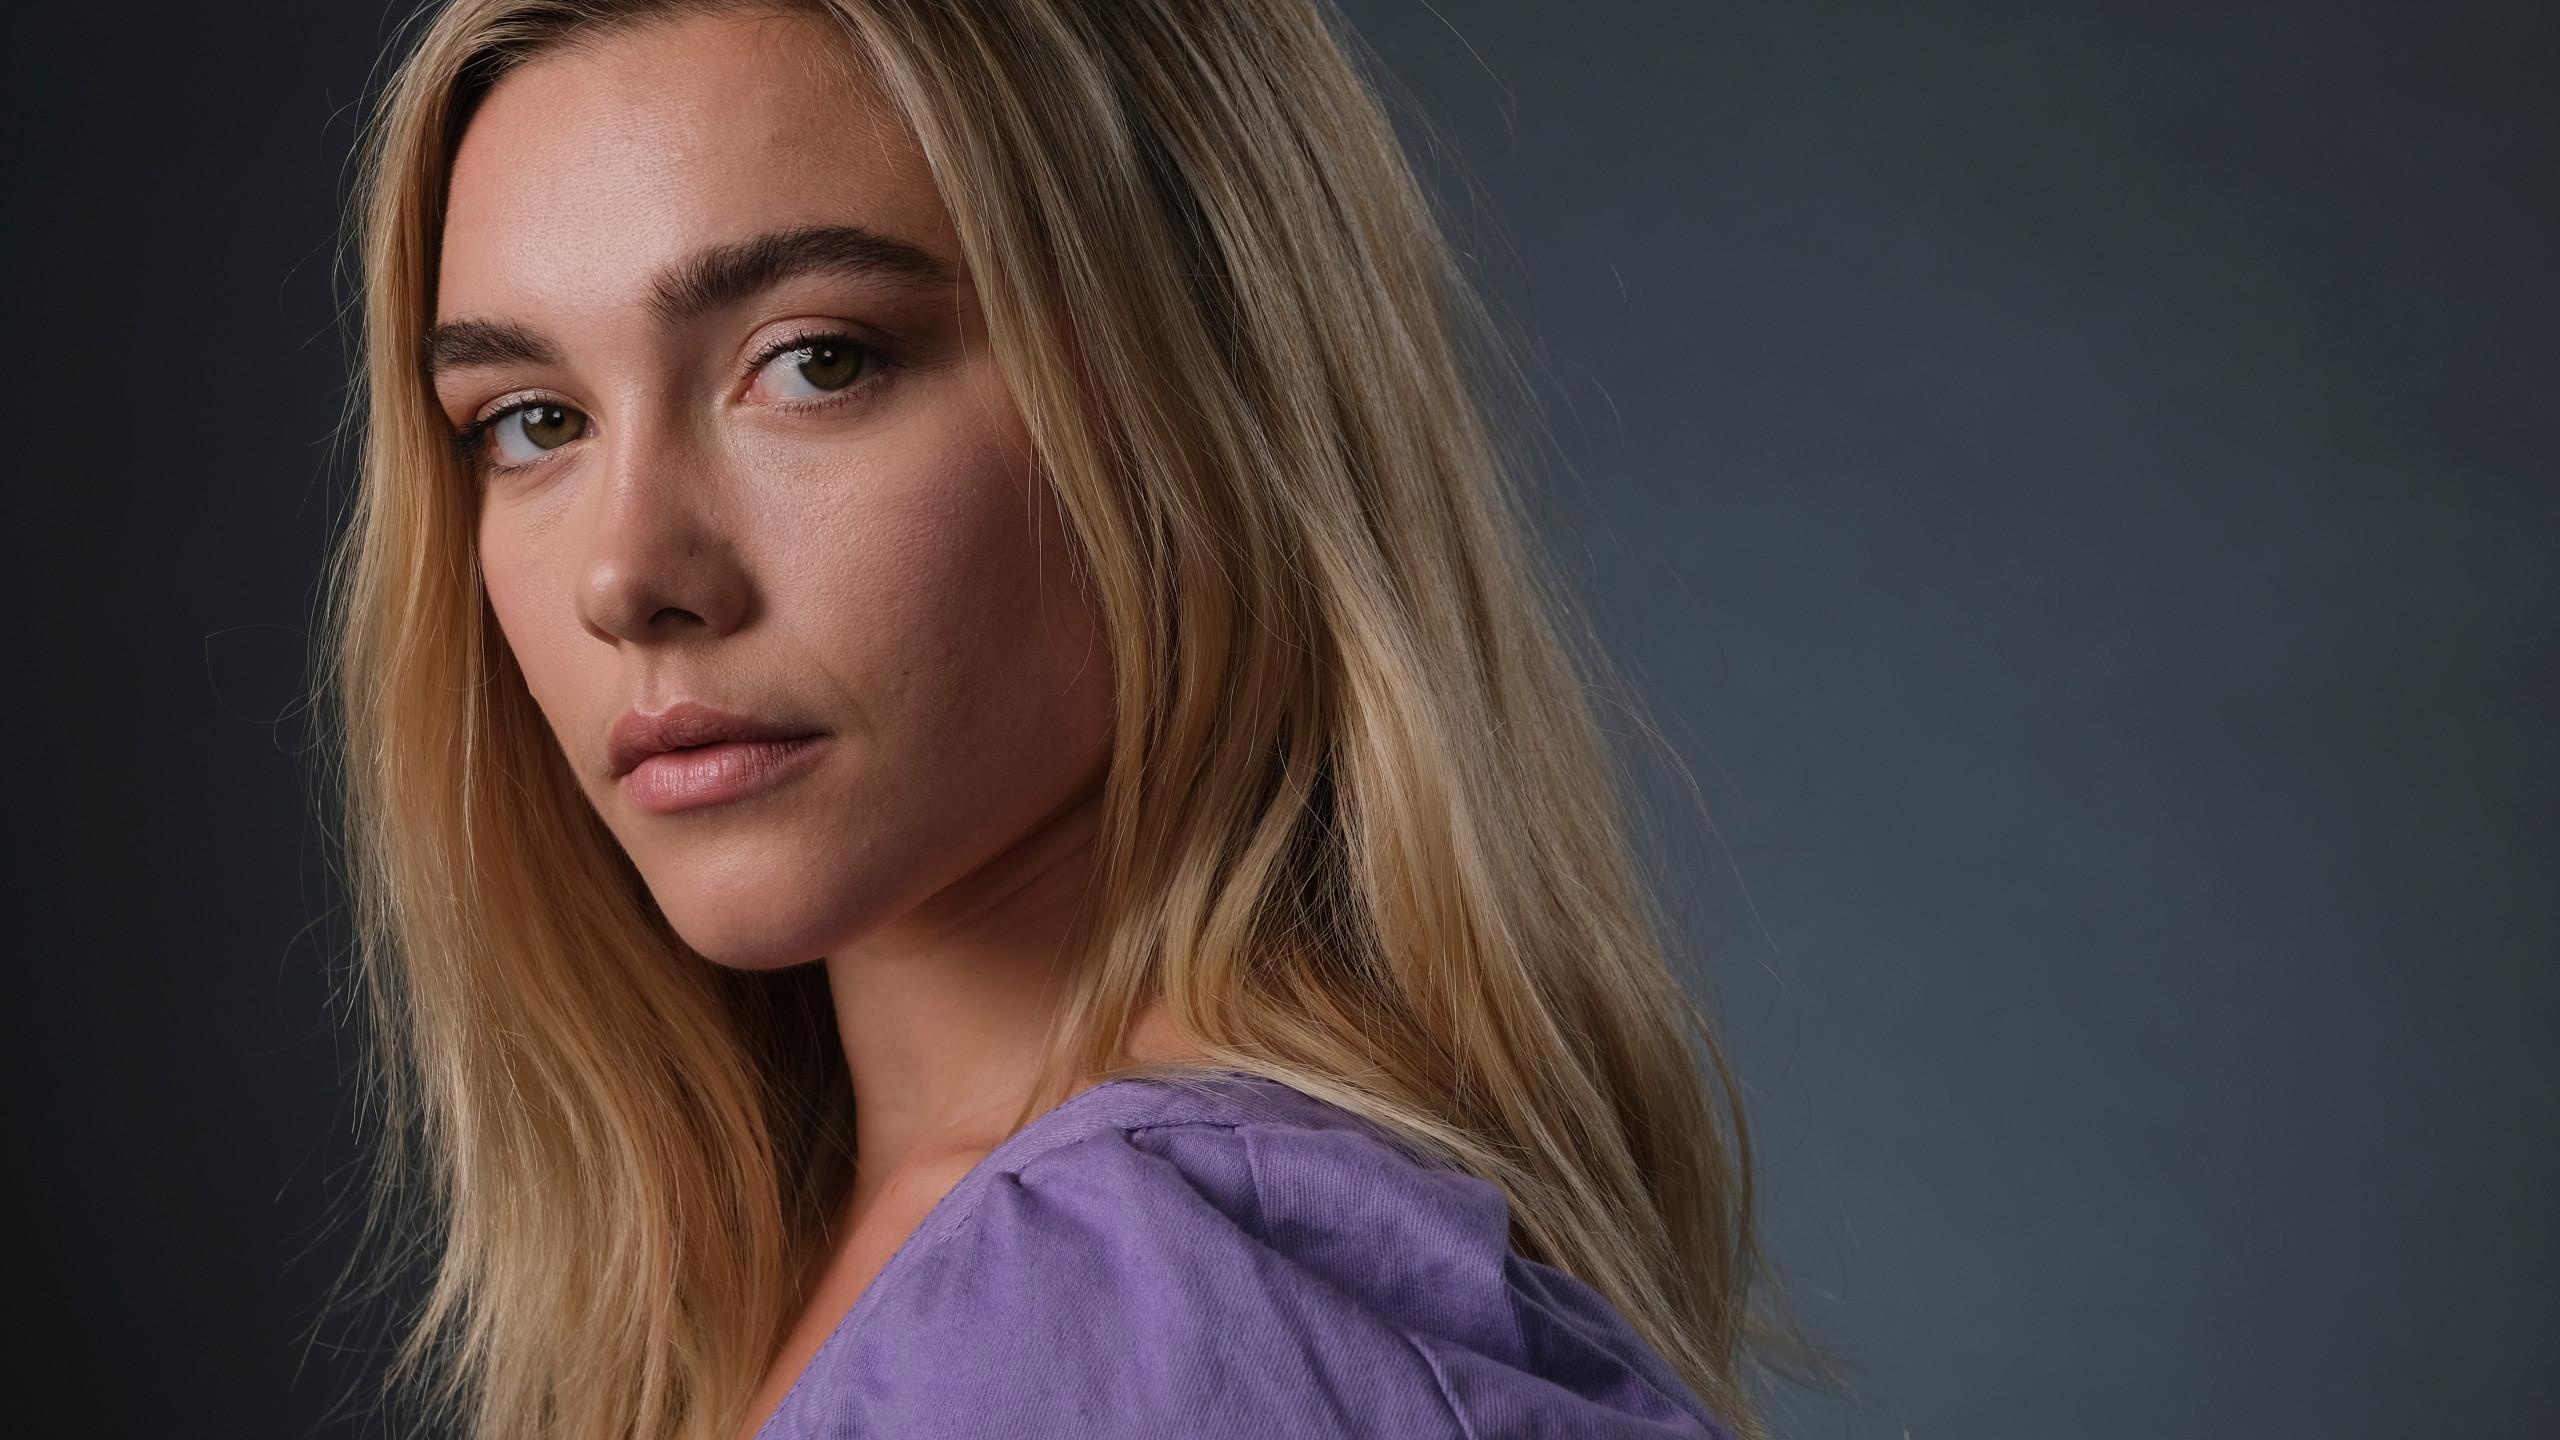 Florence Pugh wallpapers, Artistic compositions, Striking poses, Visual appeal, 2560x1440 HD Desktop